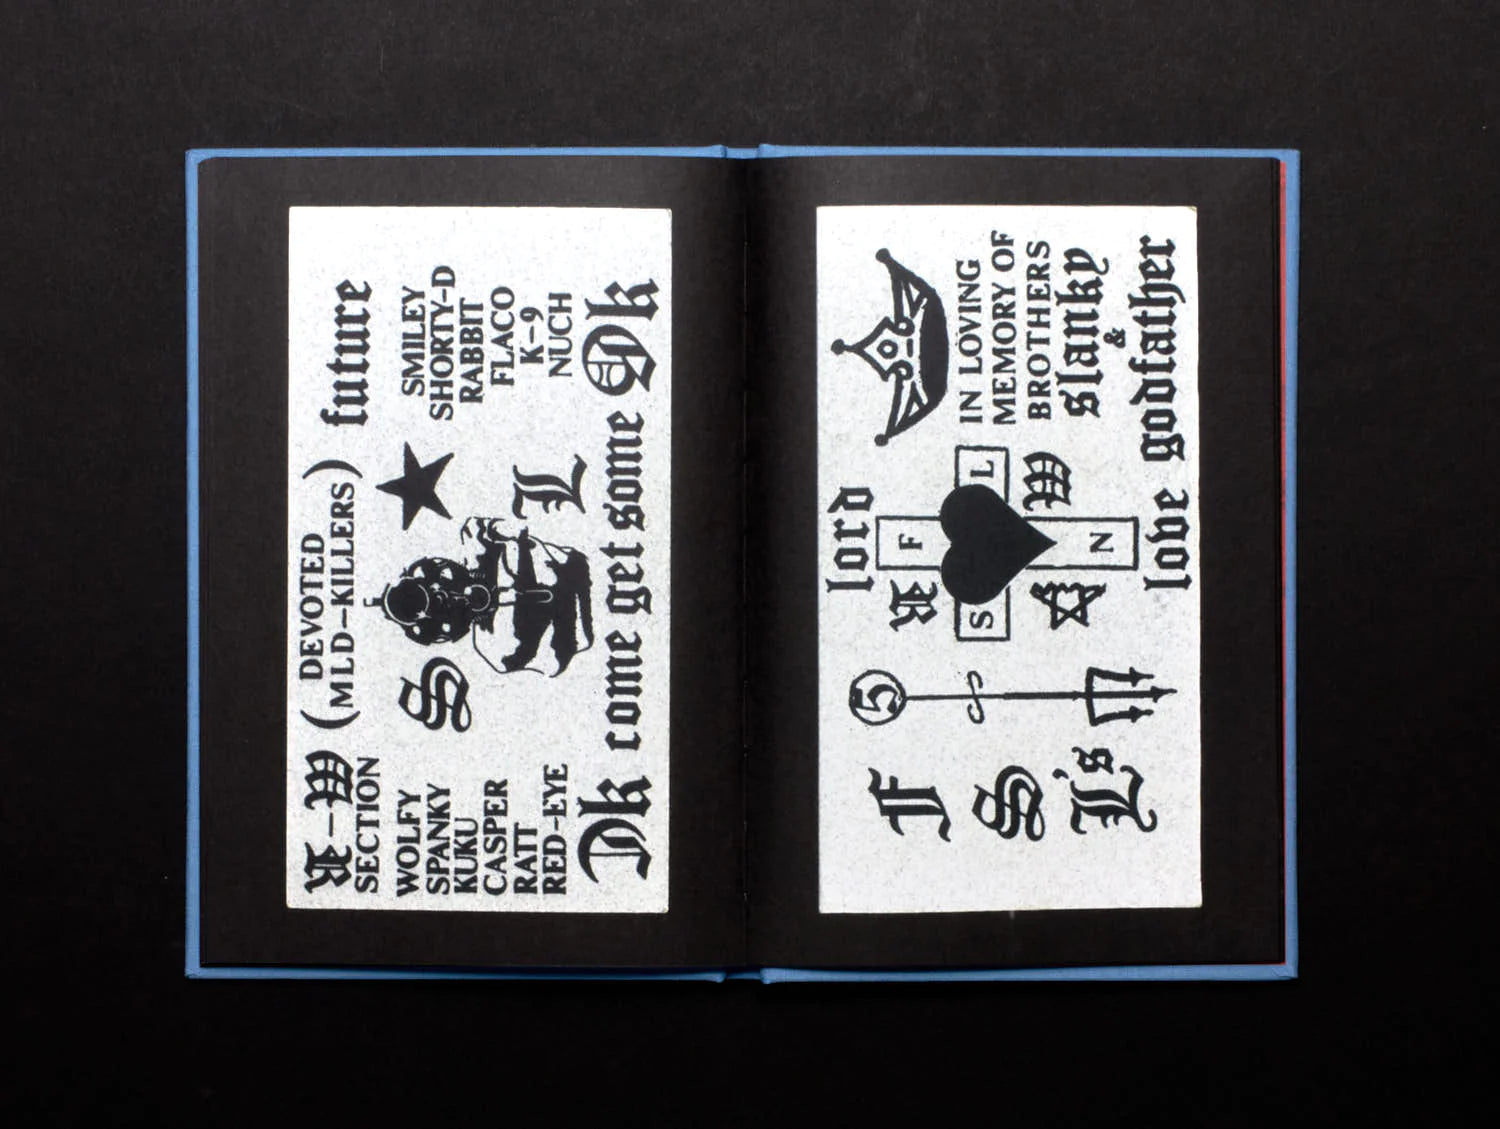 THEE ALMIGHTY & INSANE: CHICAGO GANG BUSINESS CARDS FROM THE 1970s & 1980s: CHICAGO GANG BUSINESS CARDS FROM THE 1970s & 1980s